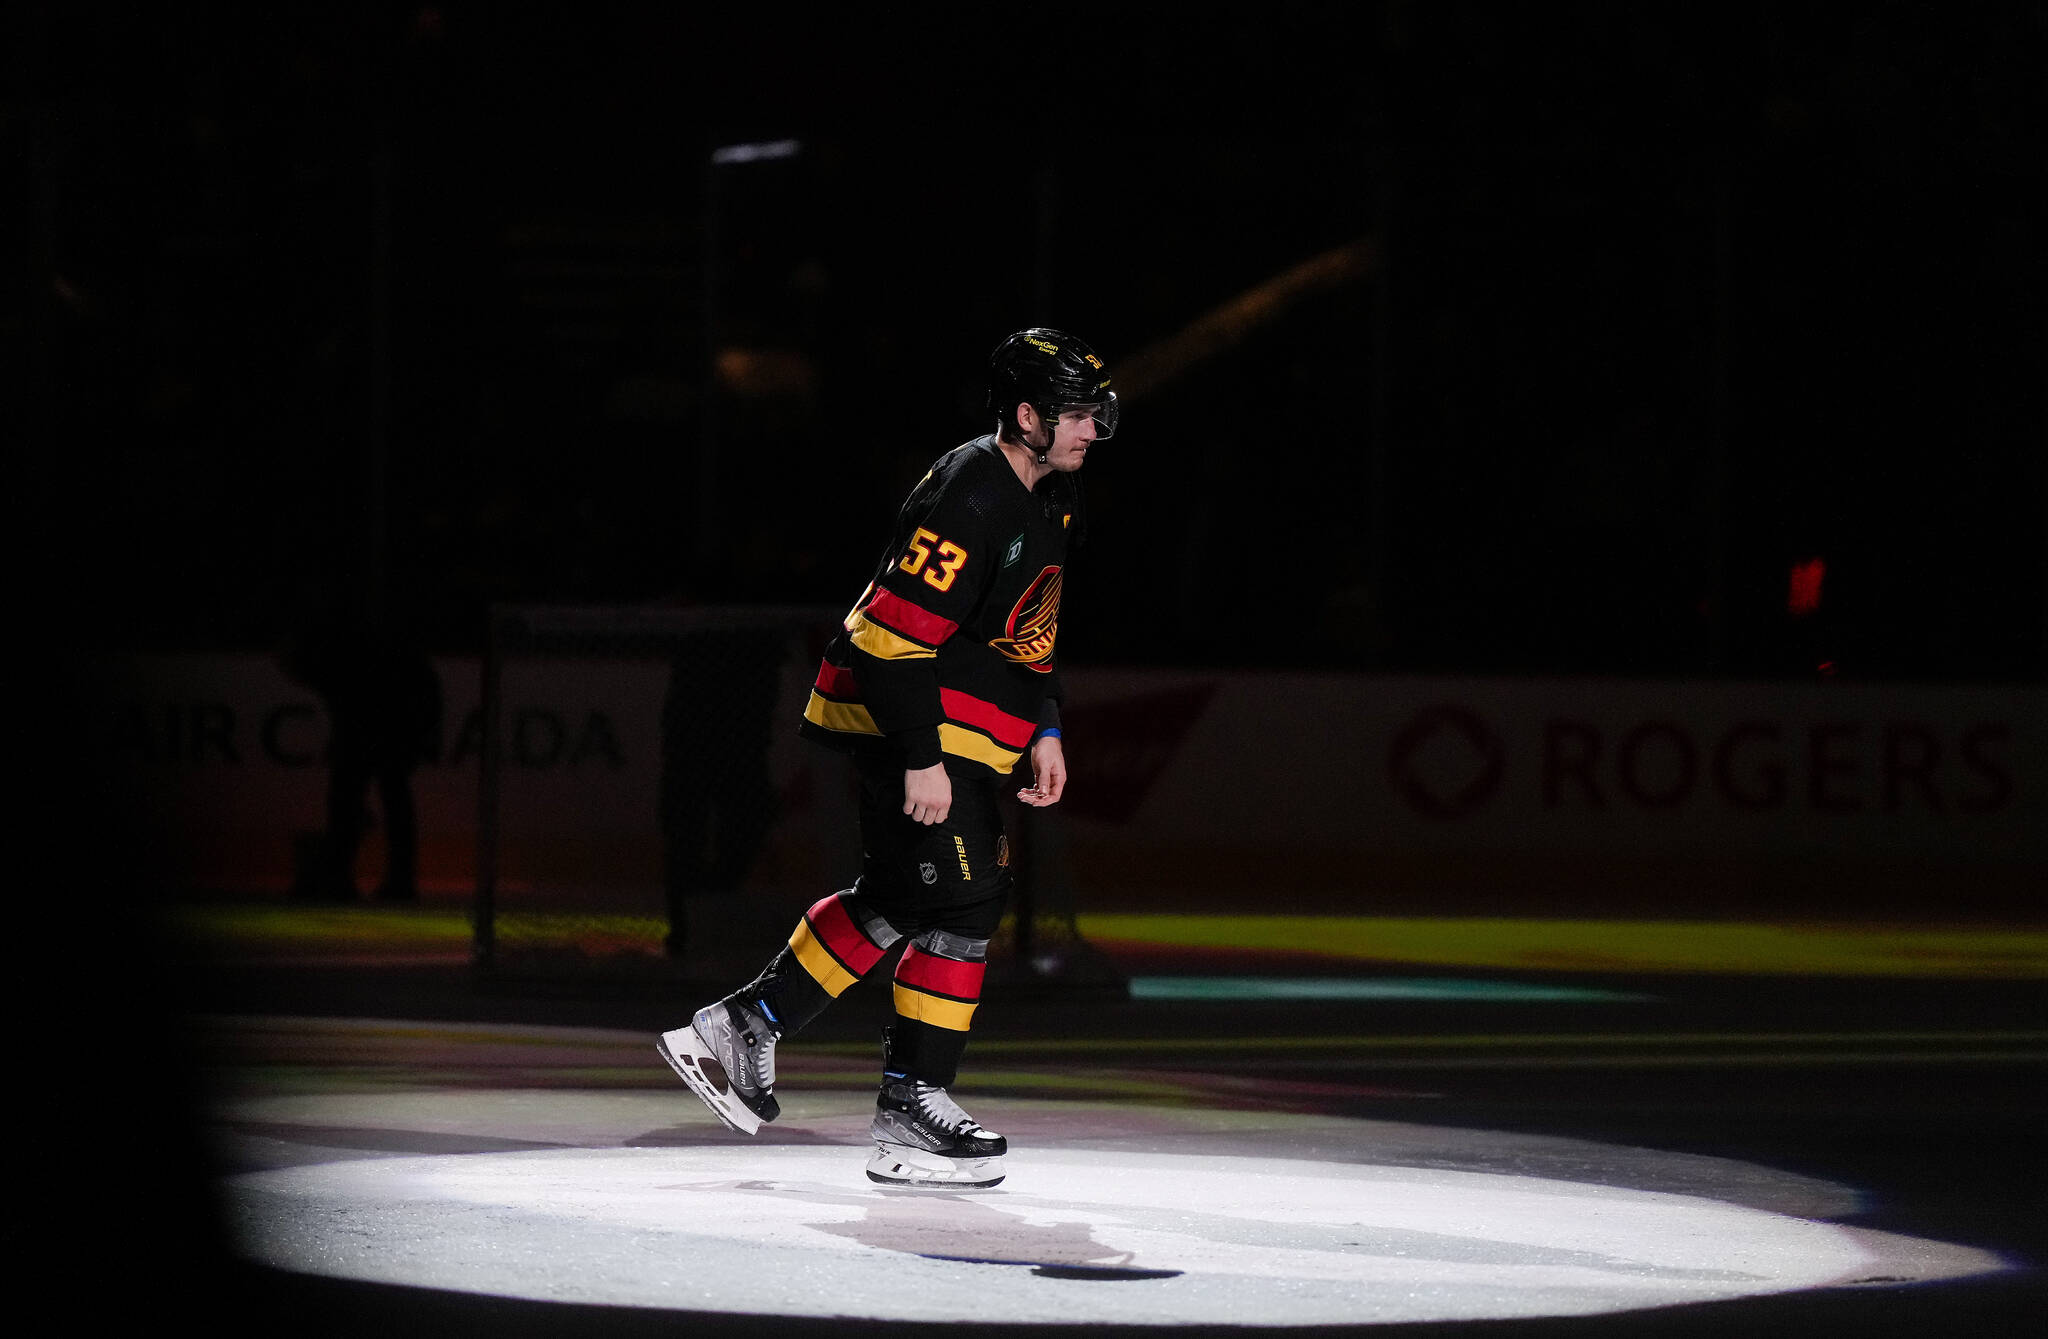 Vancouver Canucks’ Bo Horvat skates off the ice after being named the first star of an NHL hockey game against the Columbus Blue Jackets in Vancouver, on Friday, January 27, 2023. THE CANADIAN PRESS/Darryl Dyck